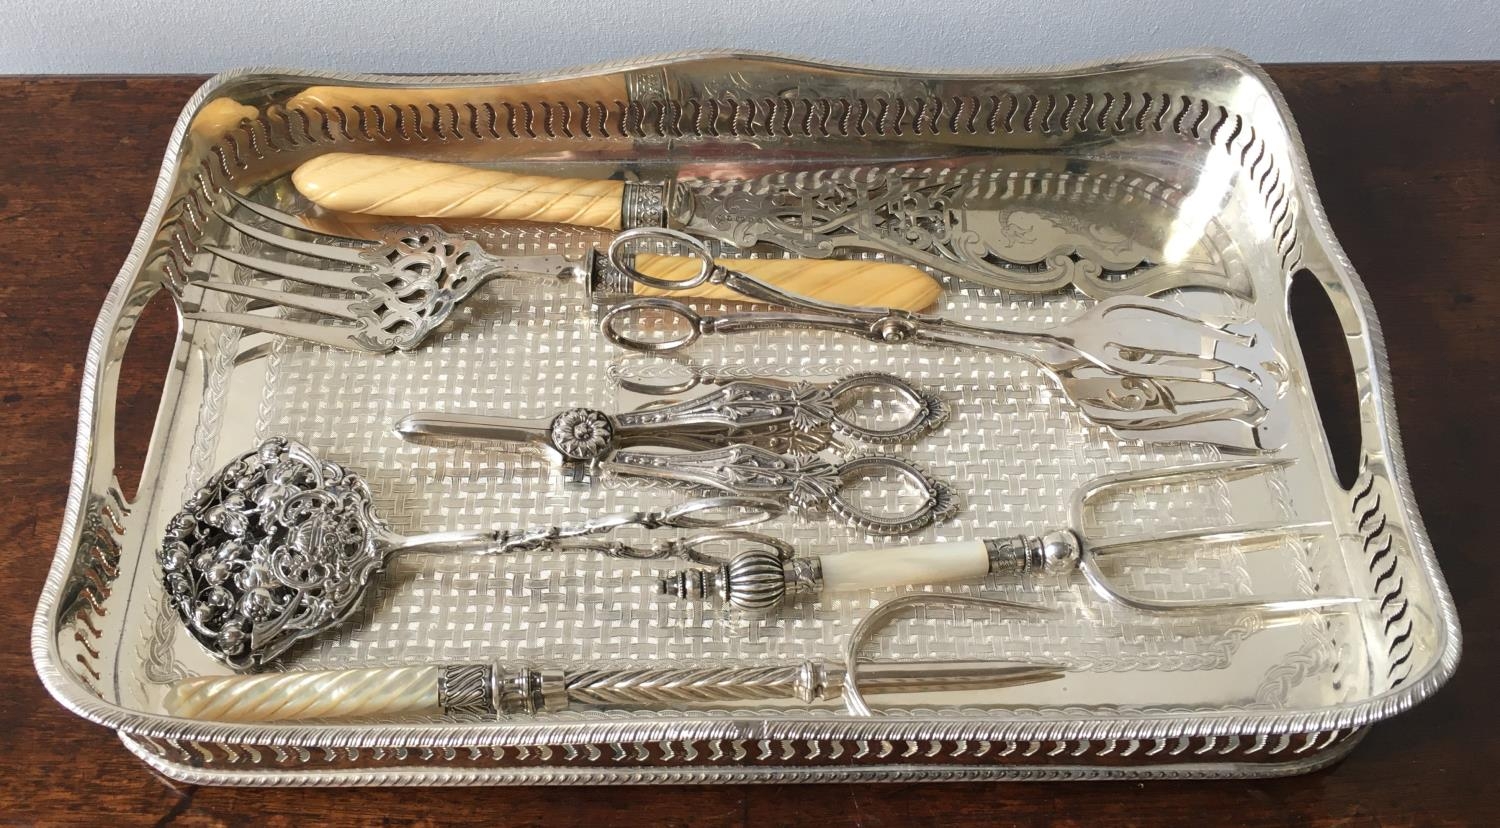 SILVER PLATED GALLERY TRAY, PAIR OF BONE HANDLE FISH SERVERS AND GRAPE SNIPS, pair of ornate